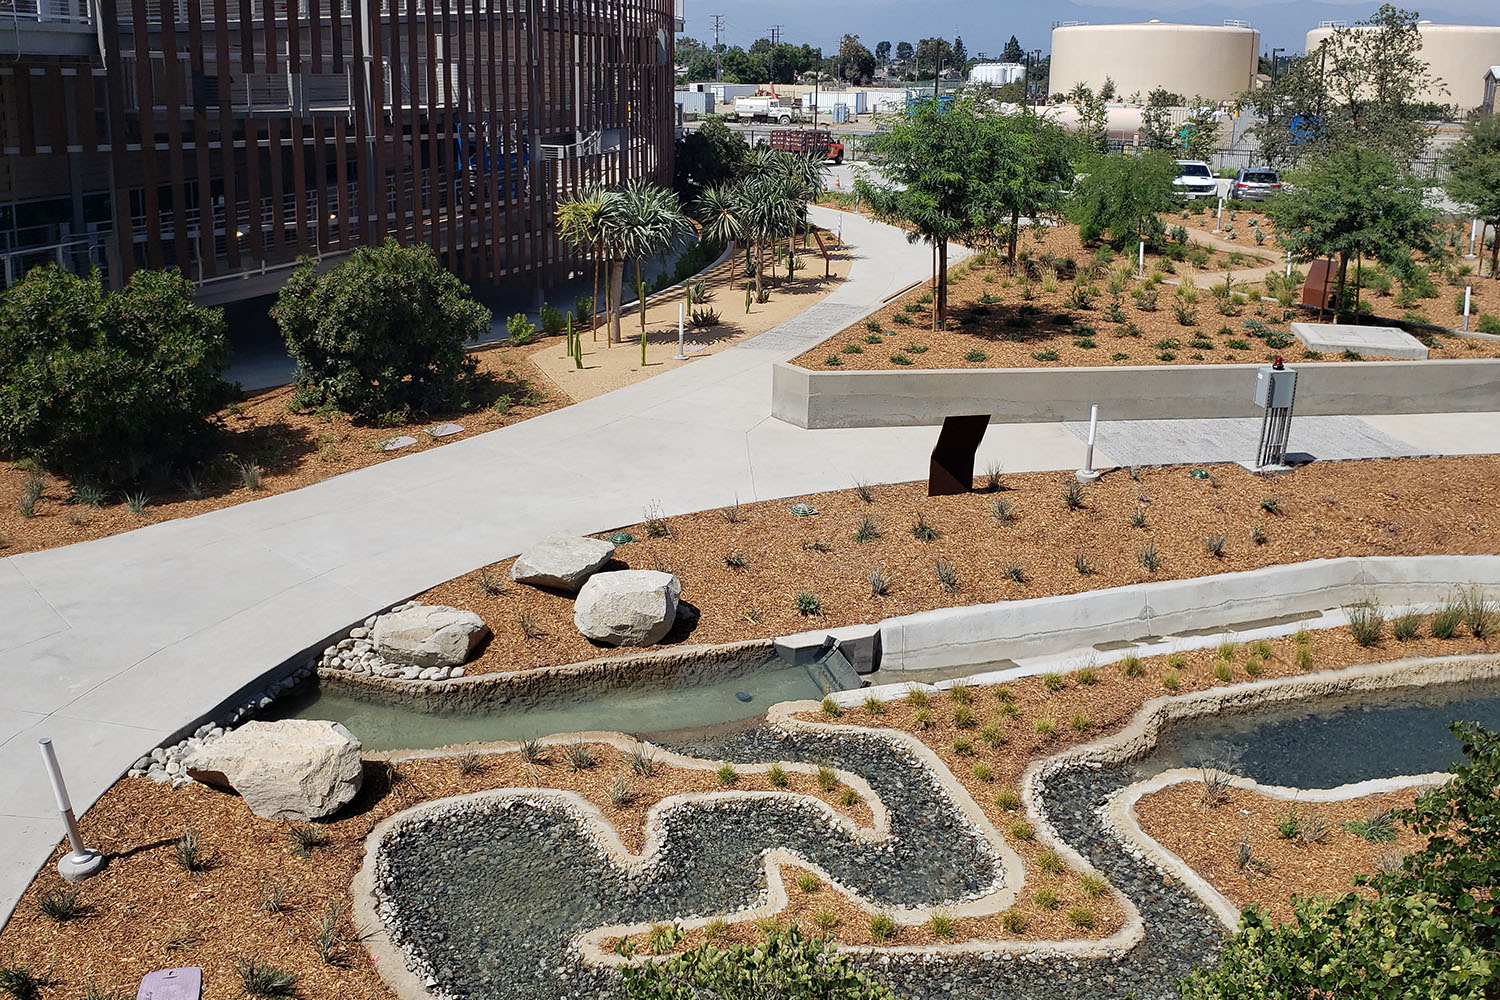 Albert Robles Center for Water Recycling and Environmental Learning (ARC)